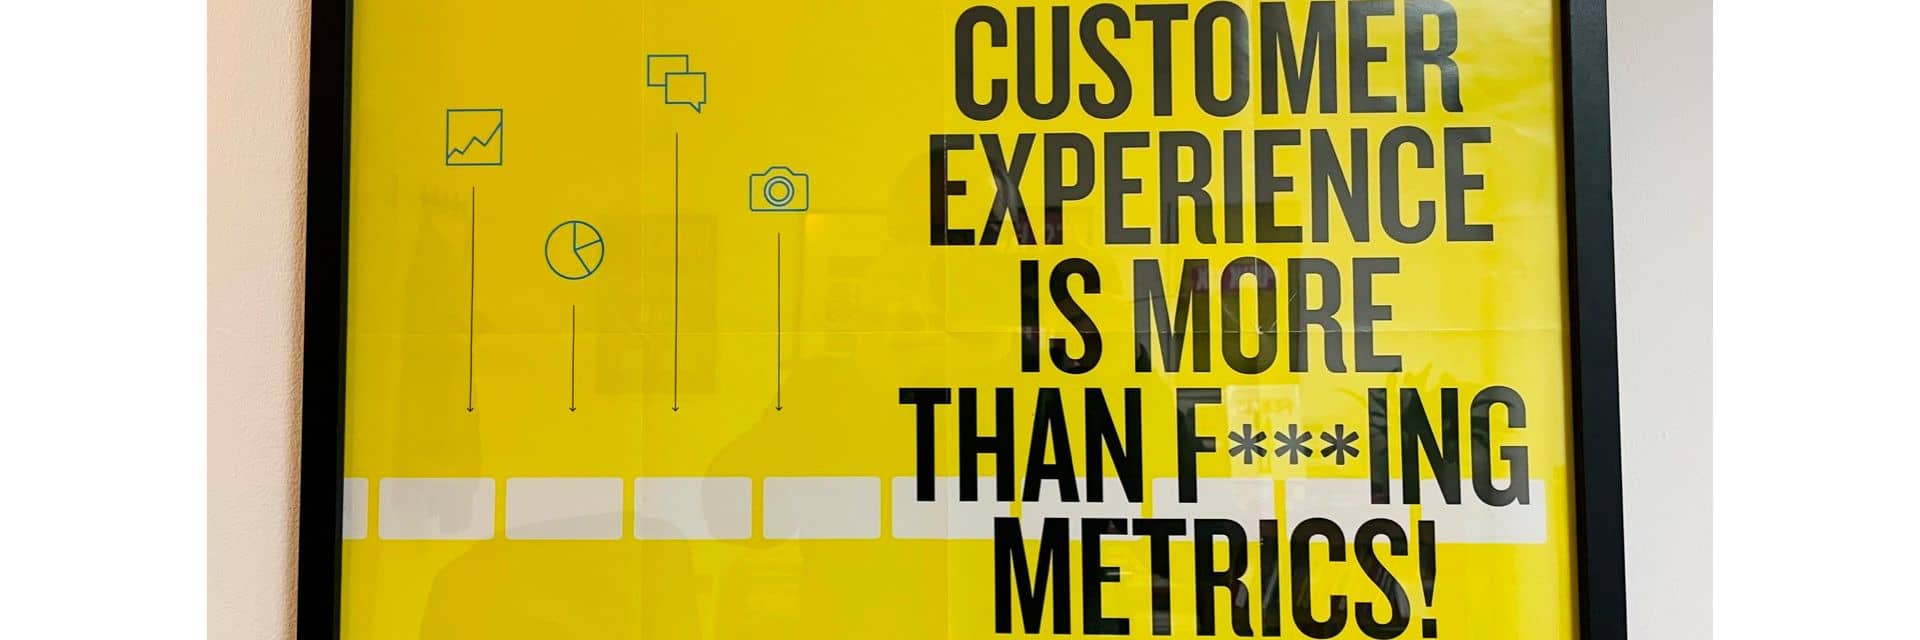 Customer experience strategy is more than metrics